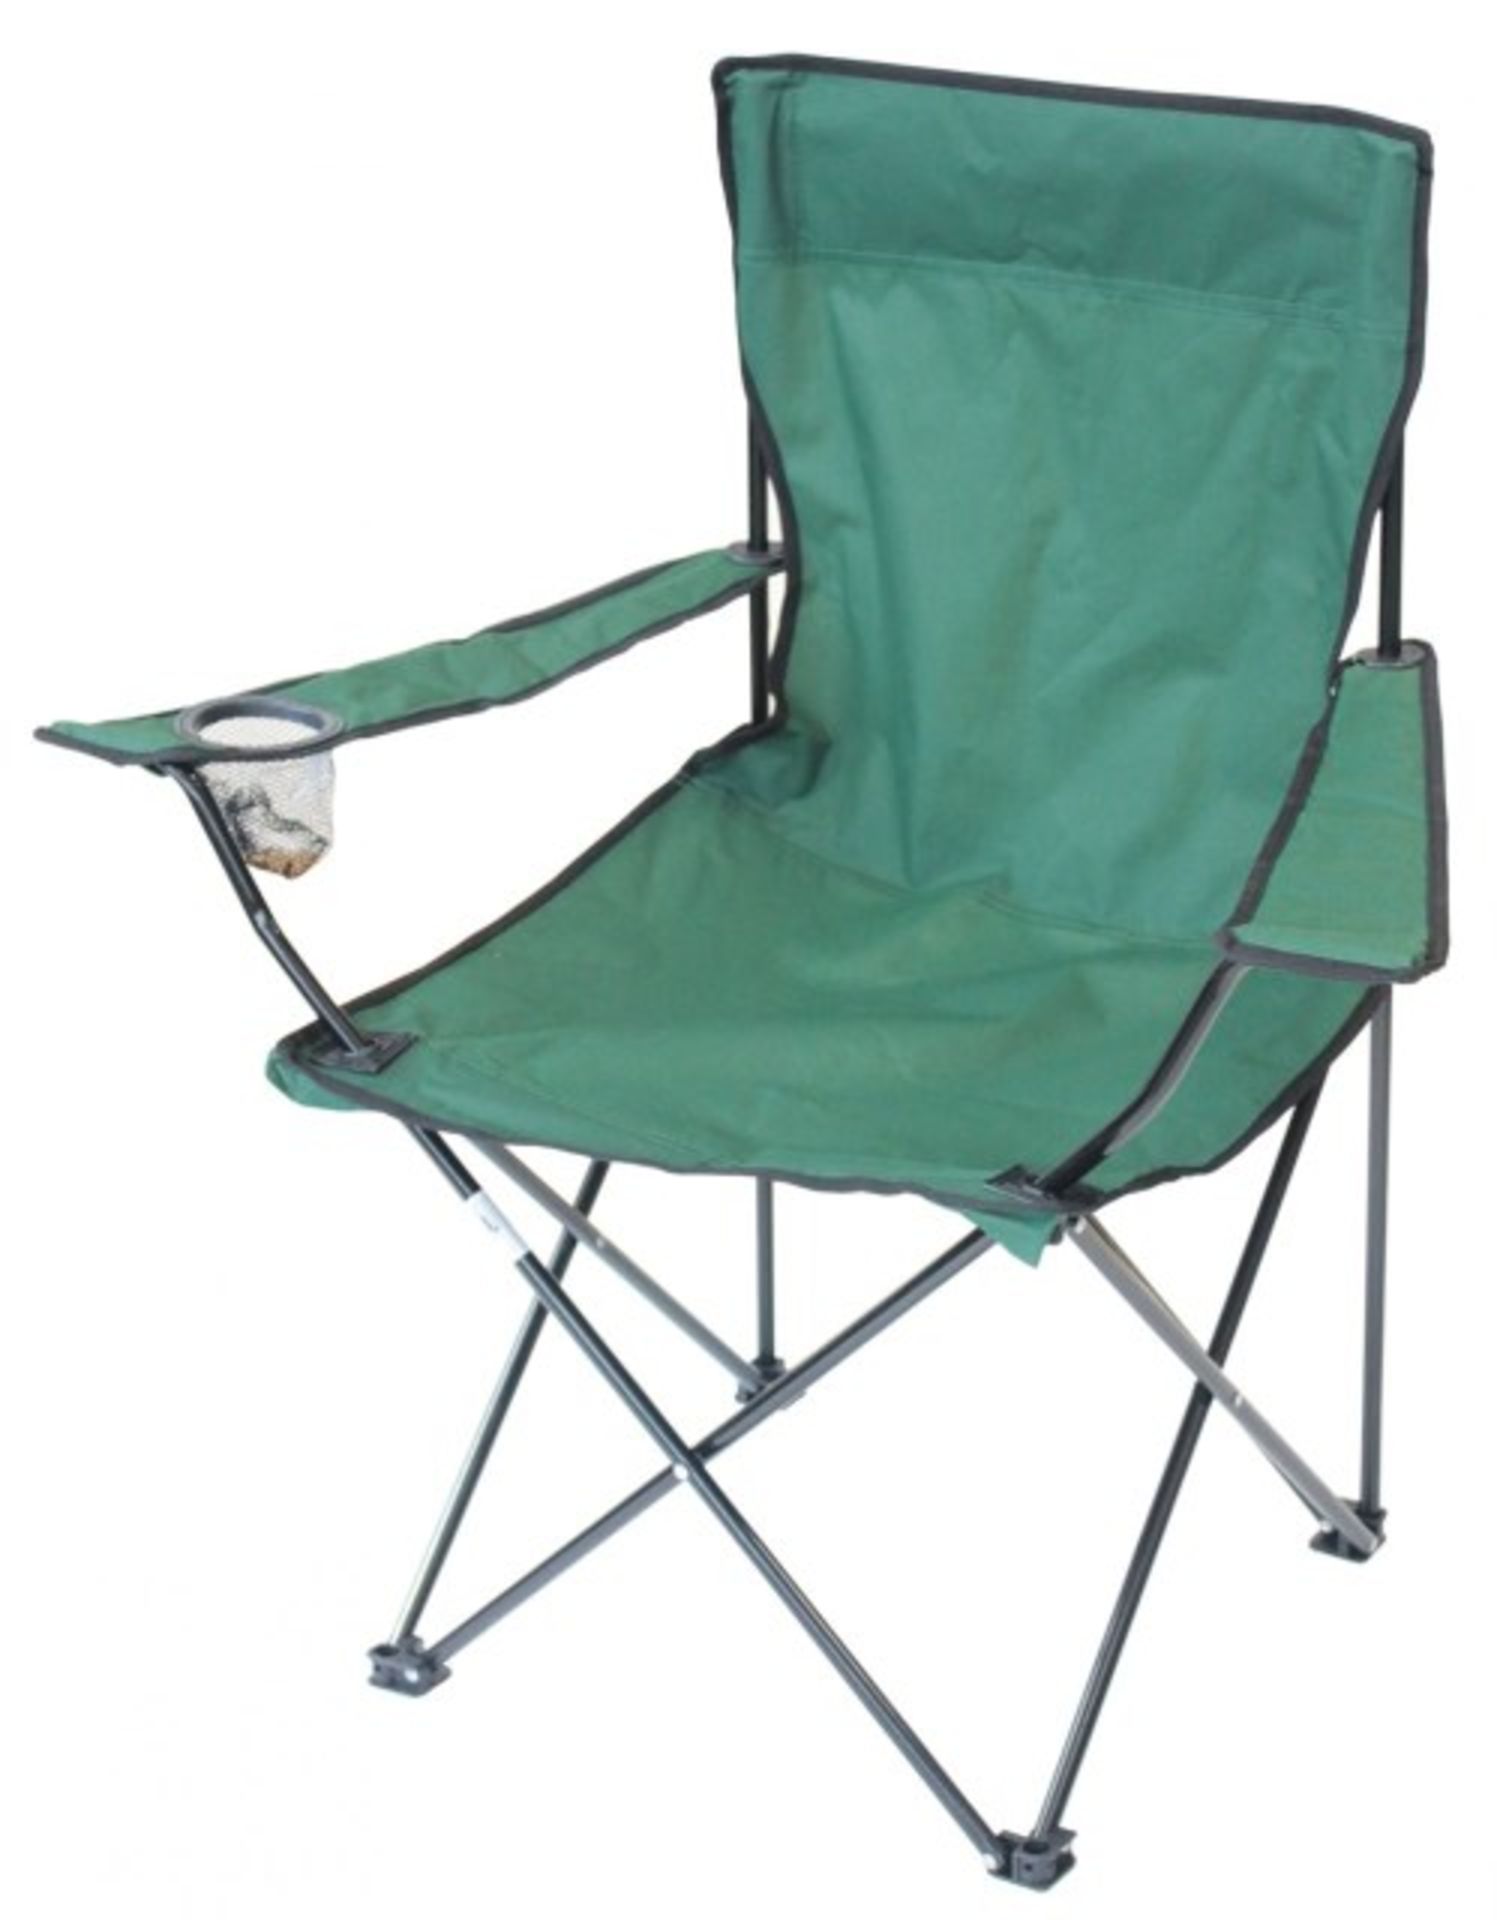 V *TRADE QTY* Brand New Folding Outdoor Chair with Cup Holder RRP £15 (similar Millets) X 6 Bid - Image 2 of 2